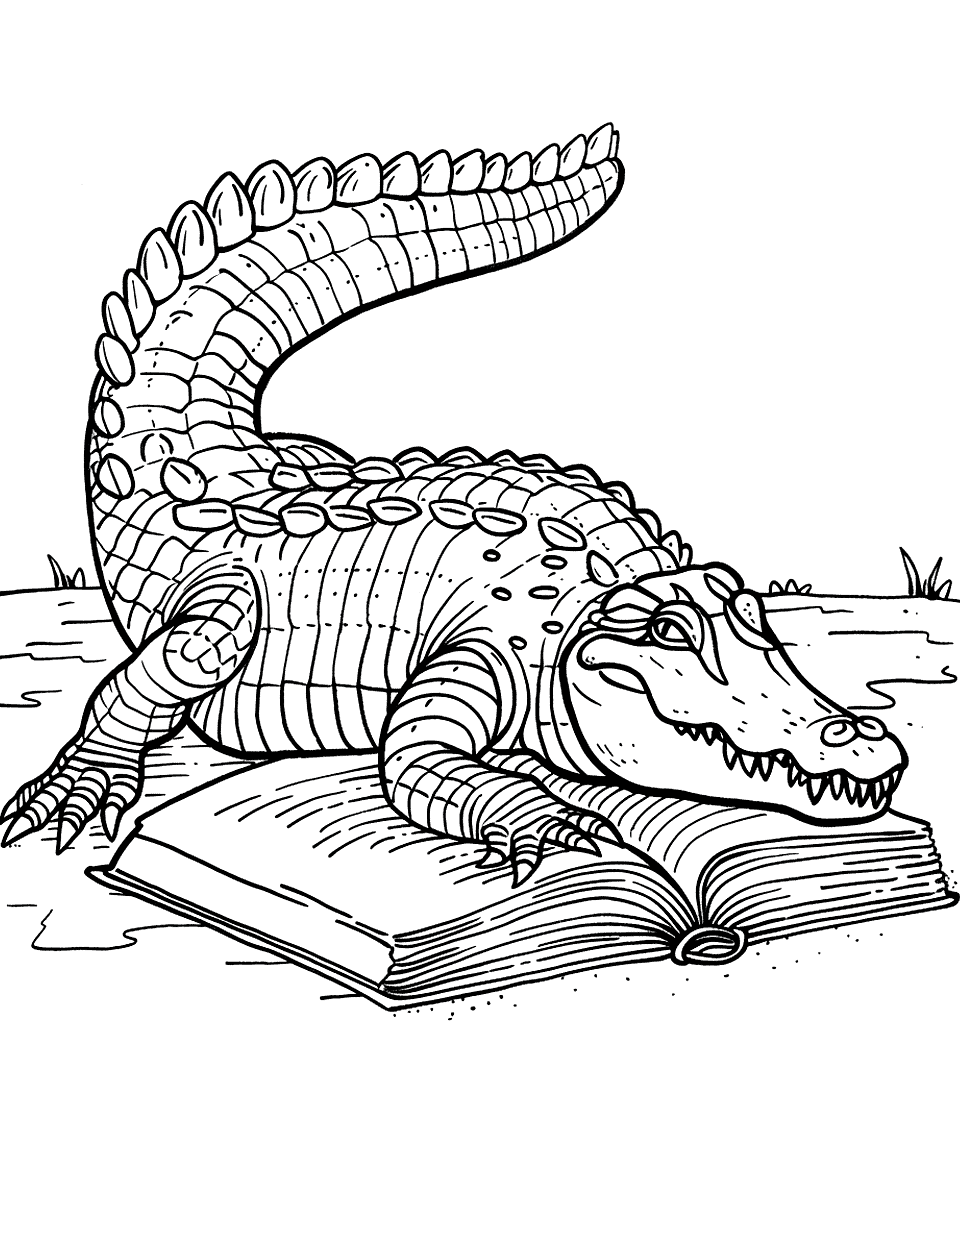 Crocodile Reading a Book Coloring Page - A crocodile engrossed in reading a big book.